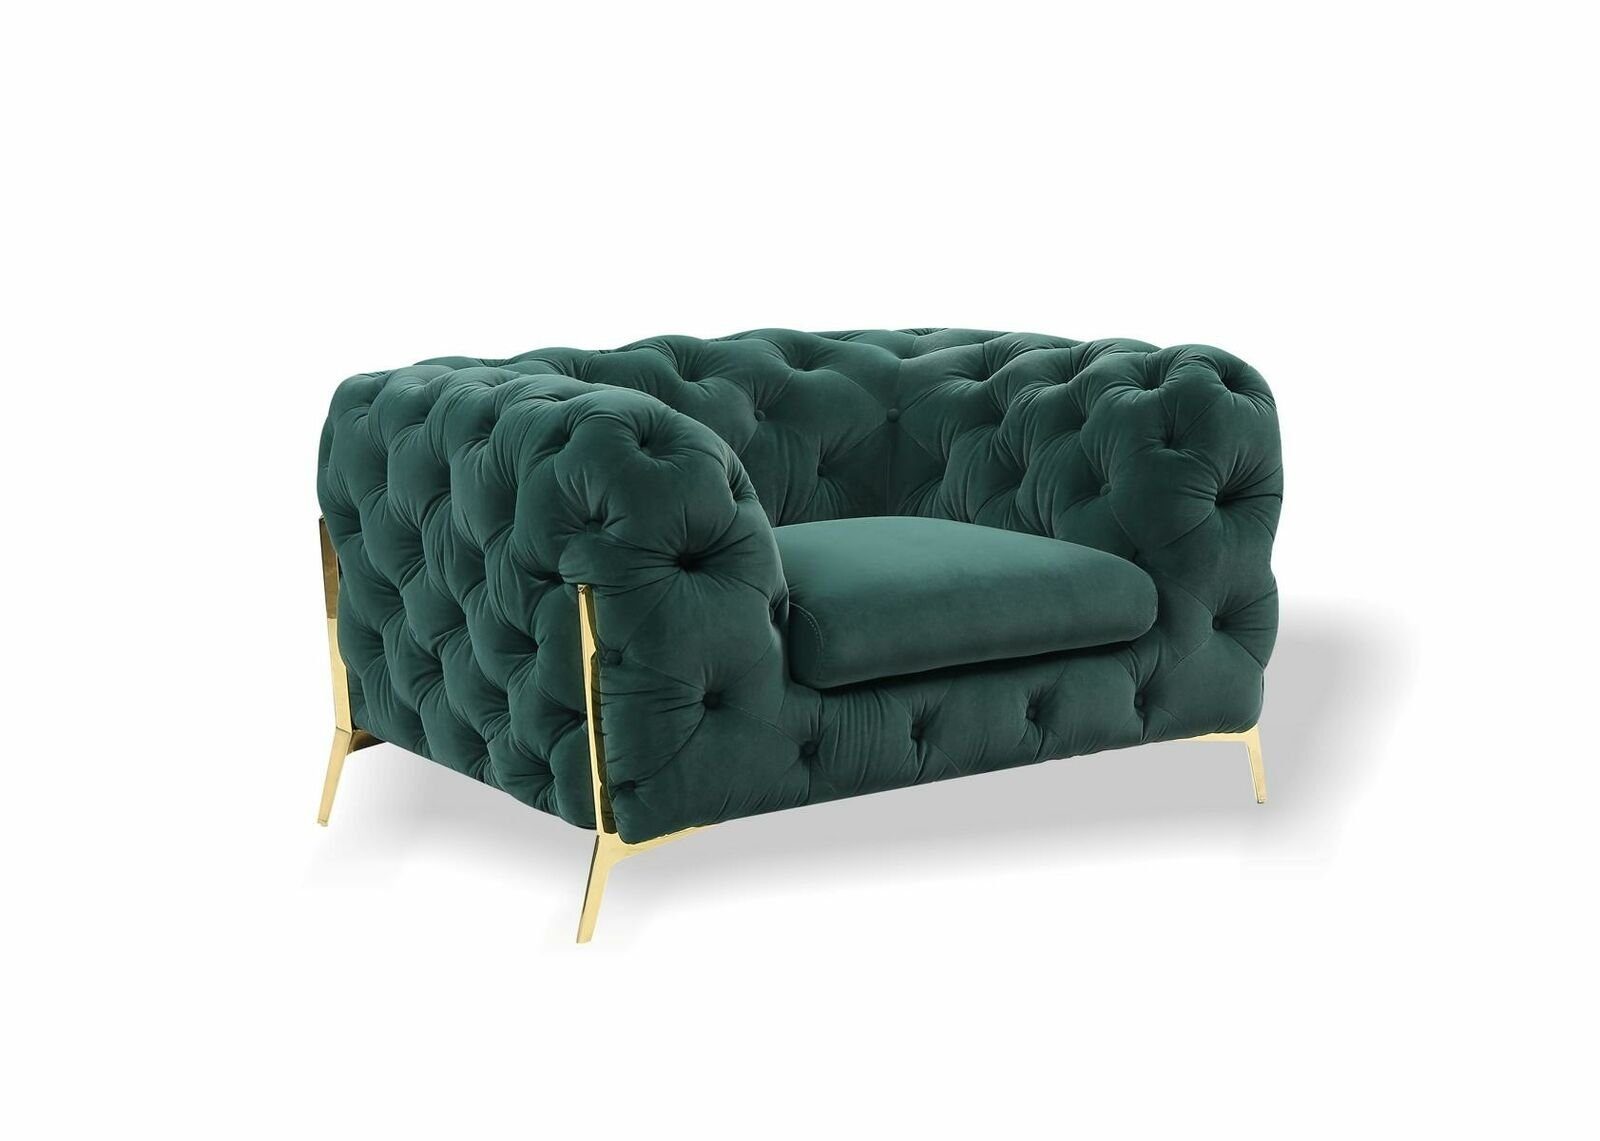 JVmoebel Ohrensessel Chesterfield Ohrensessel in Sessel Couch Sofa Europe (Sessel), Grün Couch Made Sitzer 1 Polster